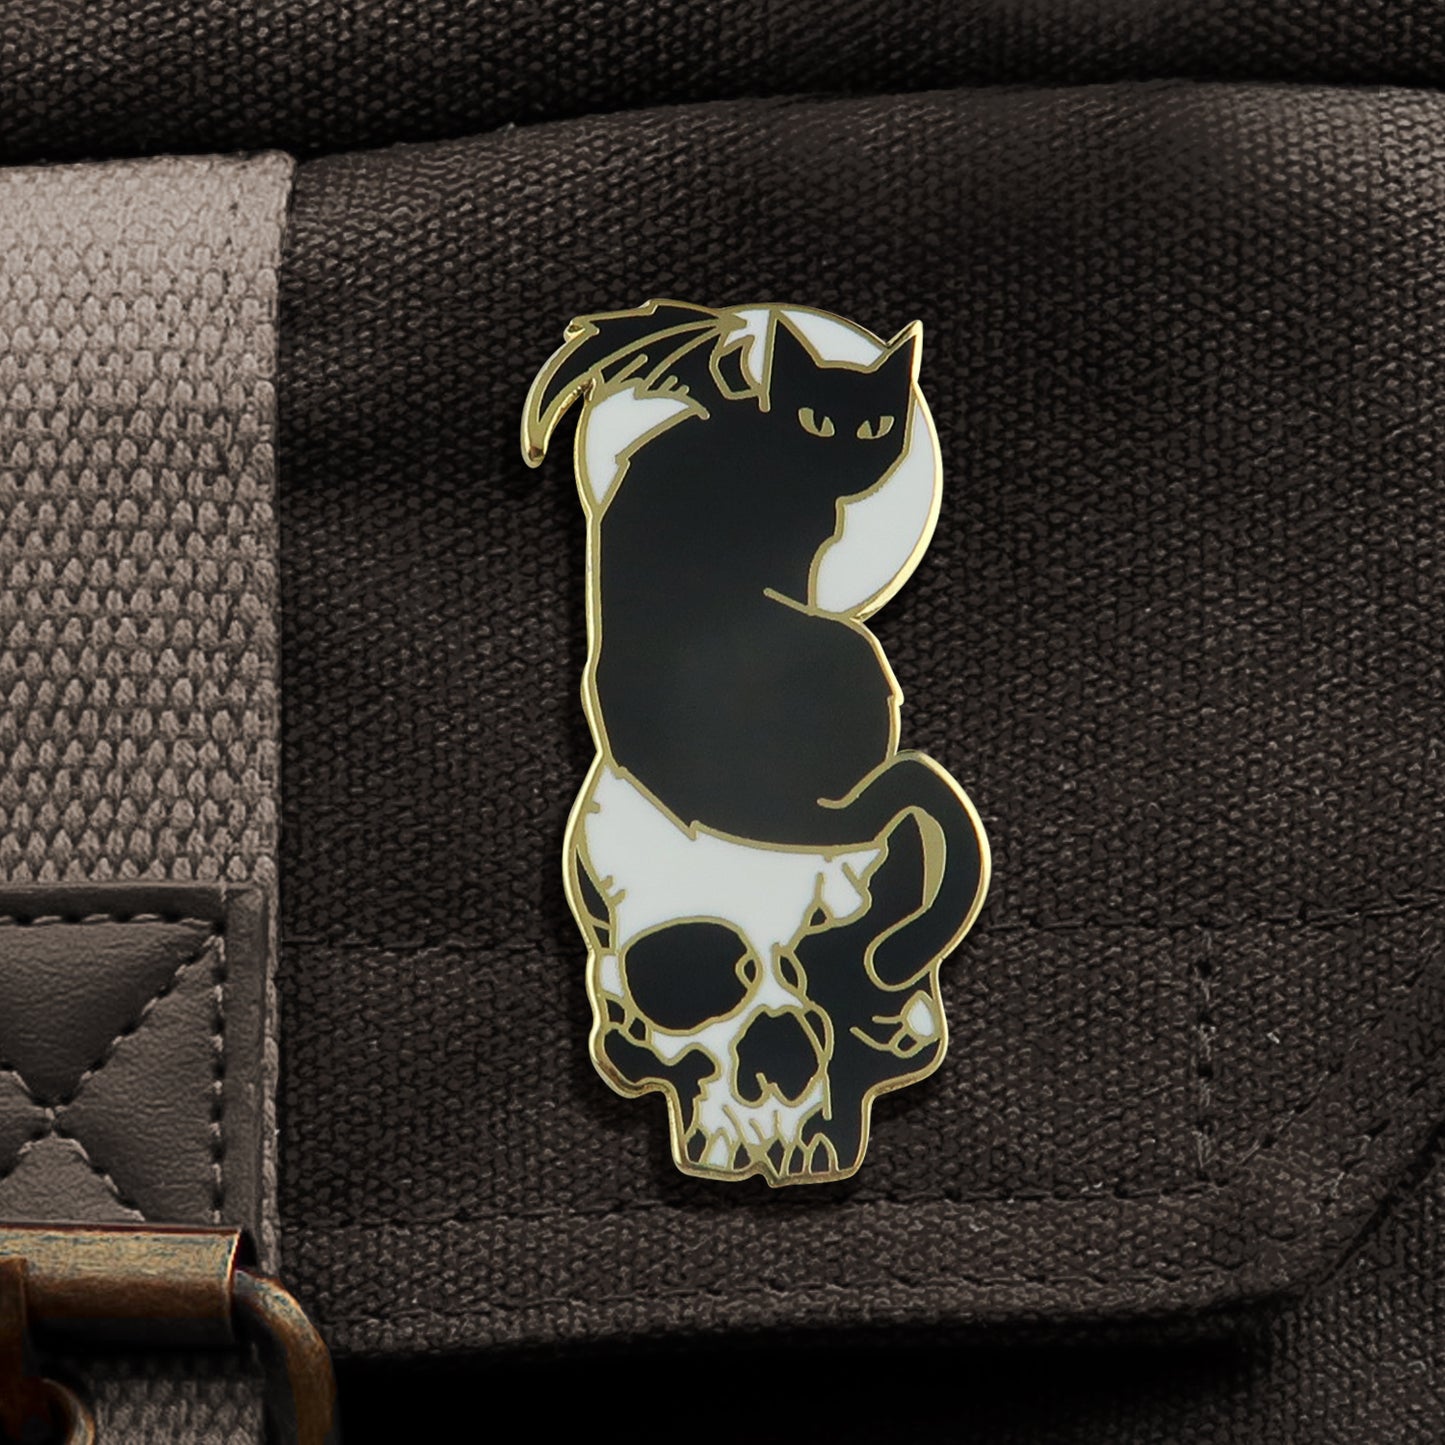 A black and gold enamal pin, attached to a black canvas bag. The pin depicts a black cat with bat wings, seen from the back with its head facing behind it. The cat is sitting on top of a white skull, and heind the cat is a round white moon. The cat's tail hangs down over the skull's left eye.